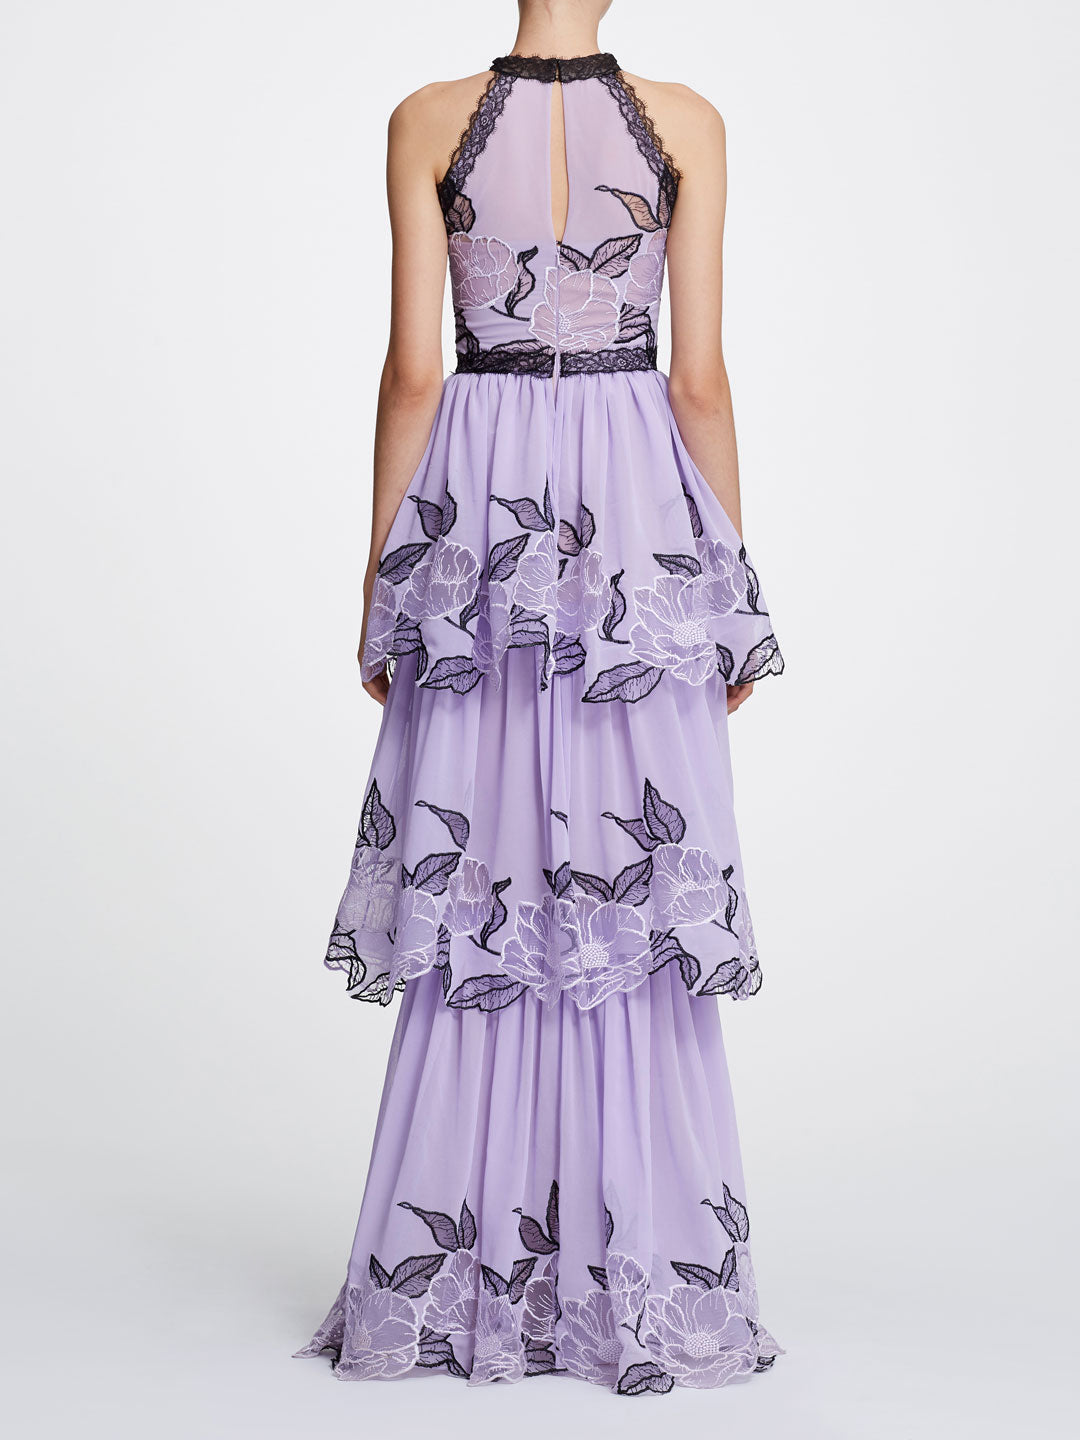 Sleeveless floral chiffon tulle gown | Shop Marchesa Notte